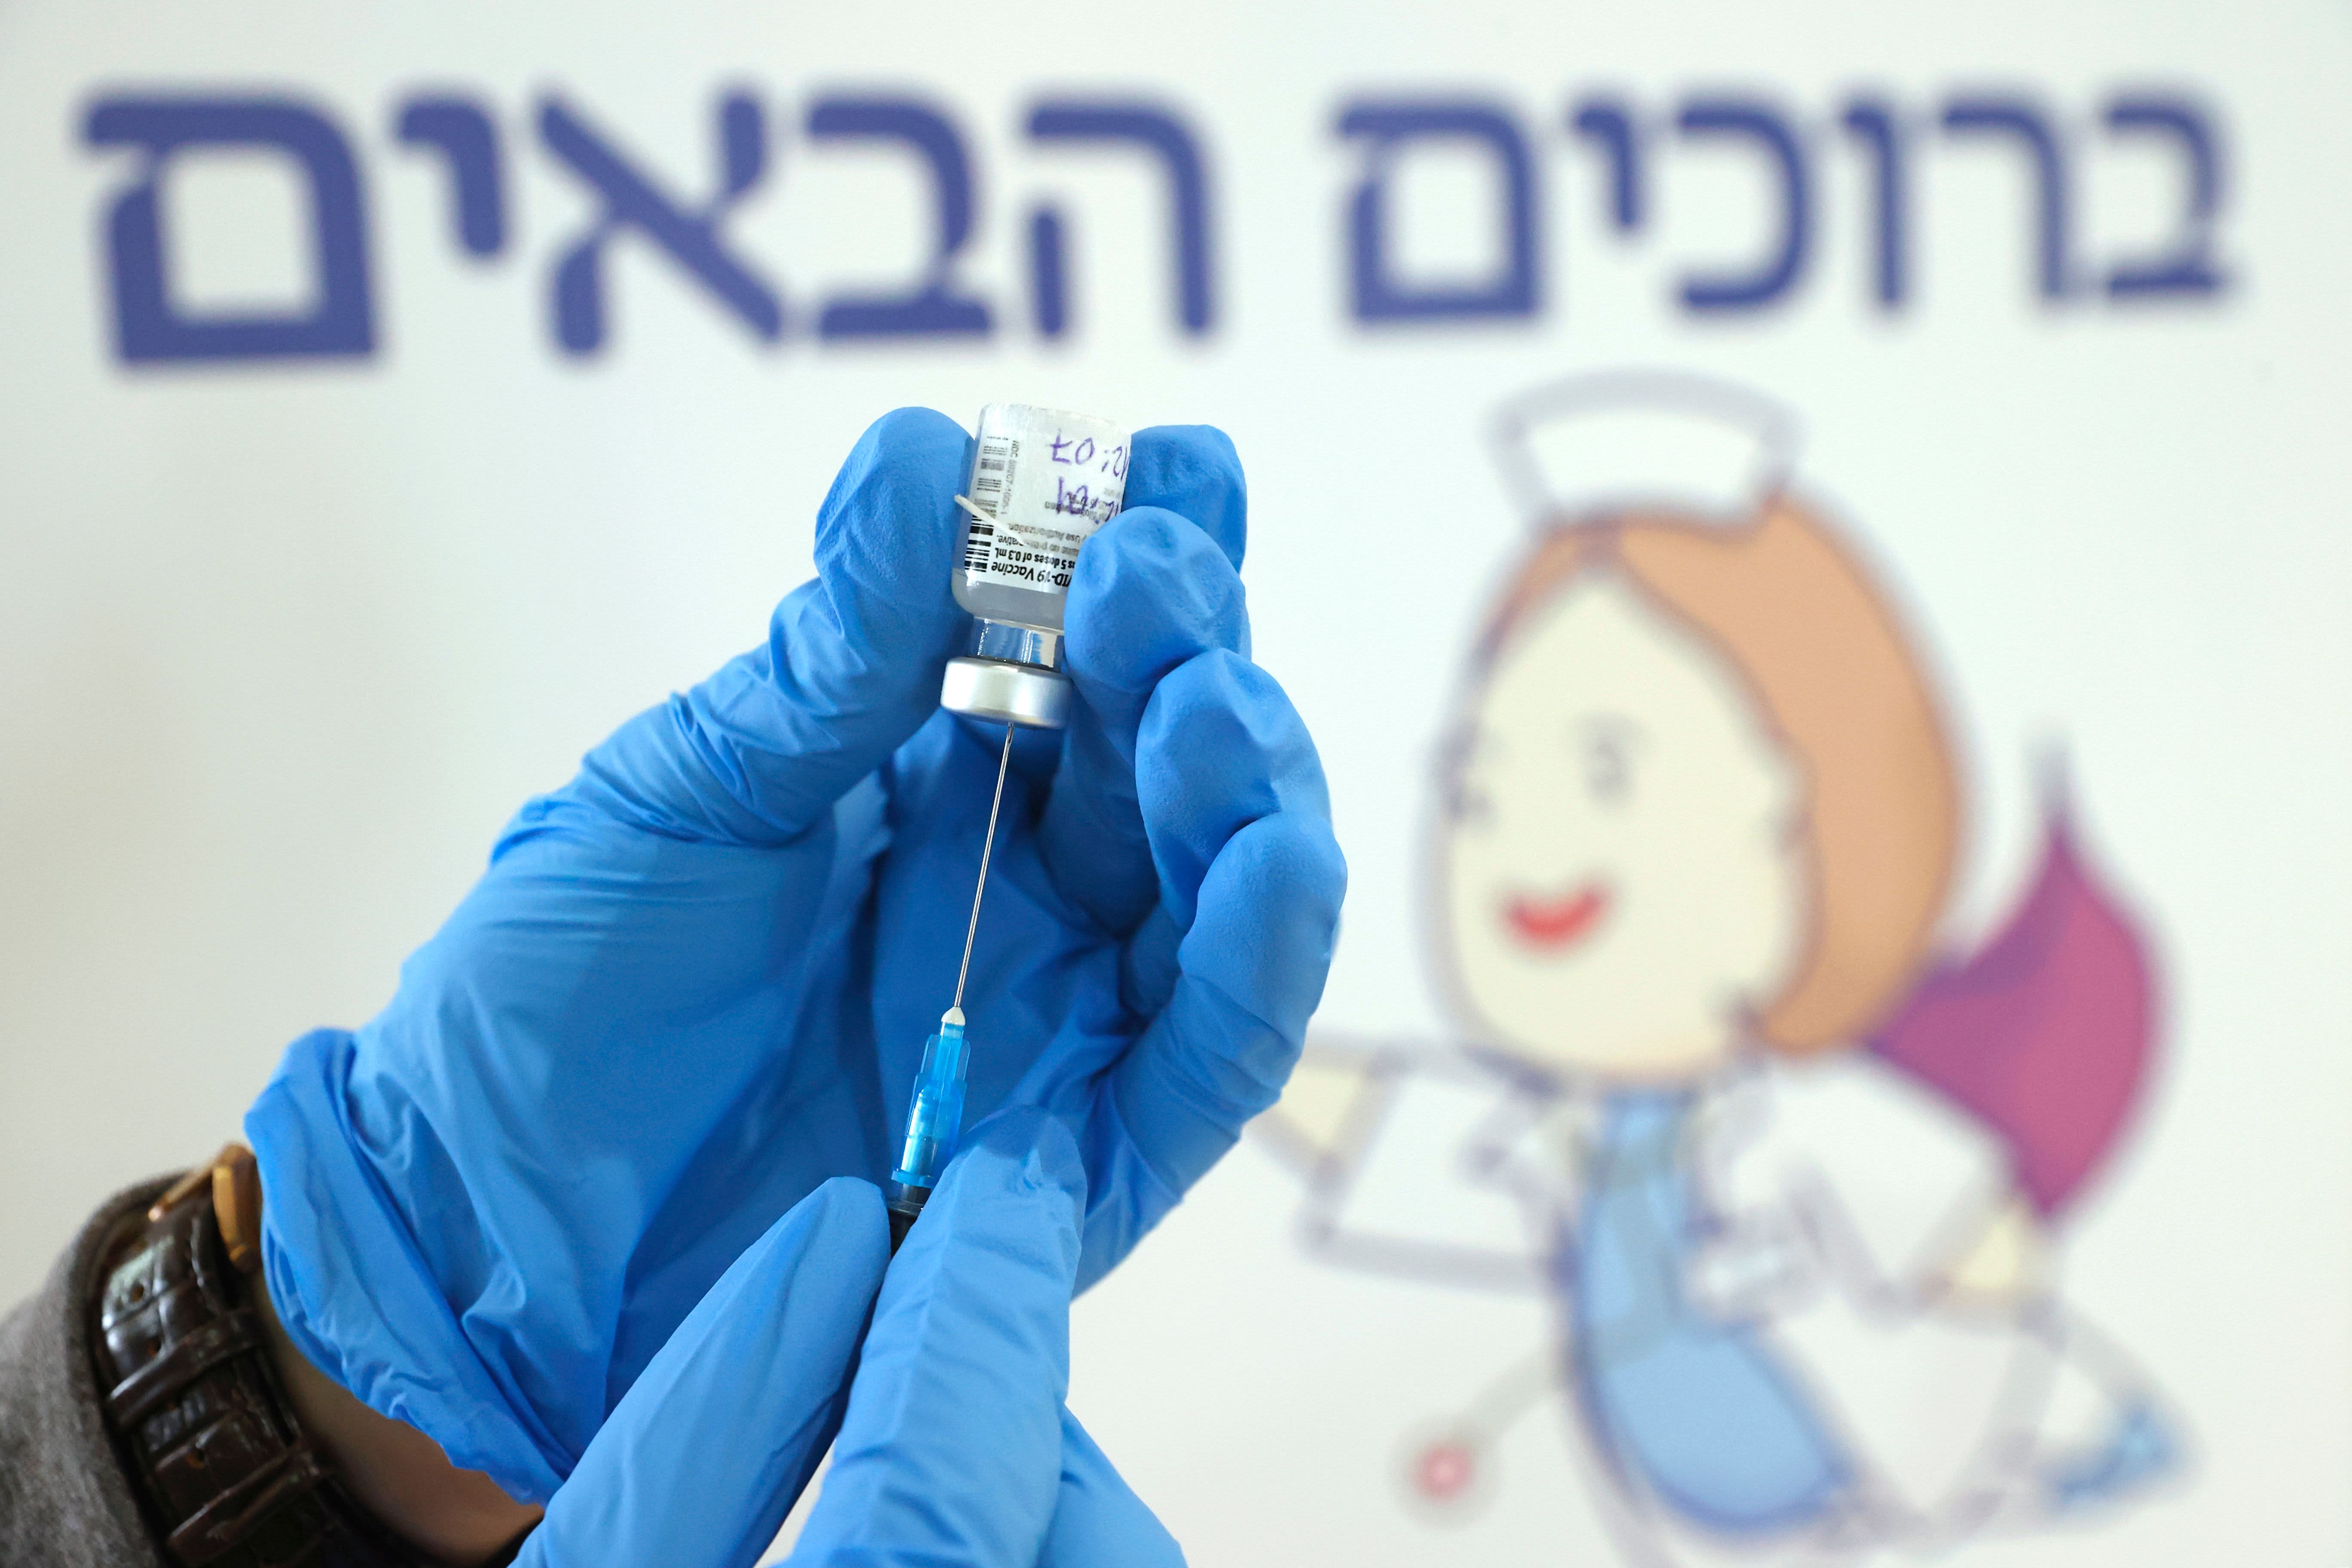 Israeli data suggest that mass vaccinations led to a drop in severe Covid cases, according to CDC study